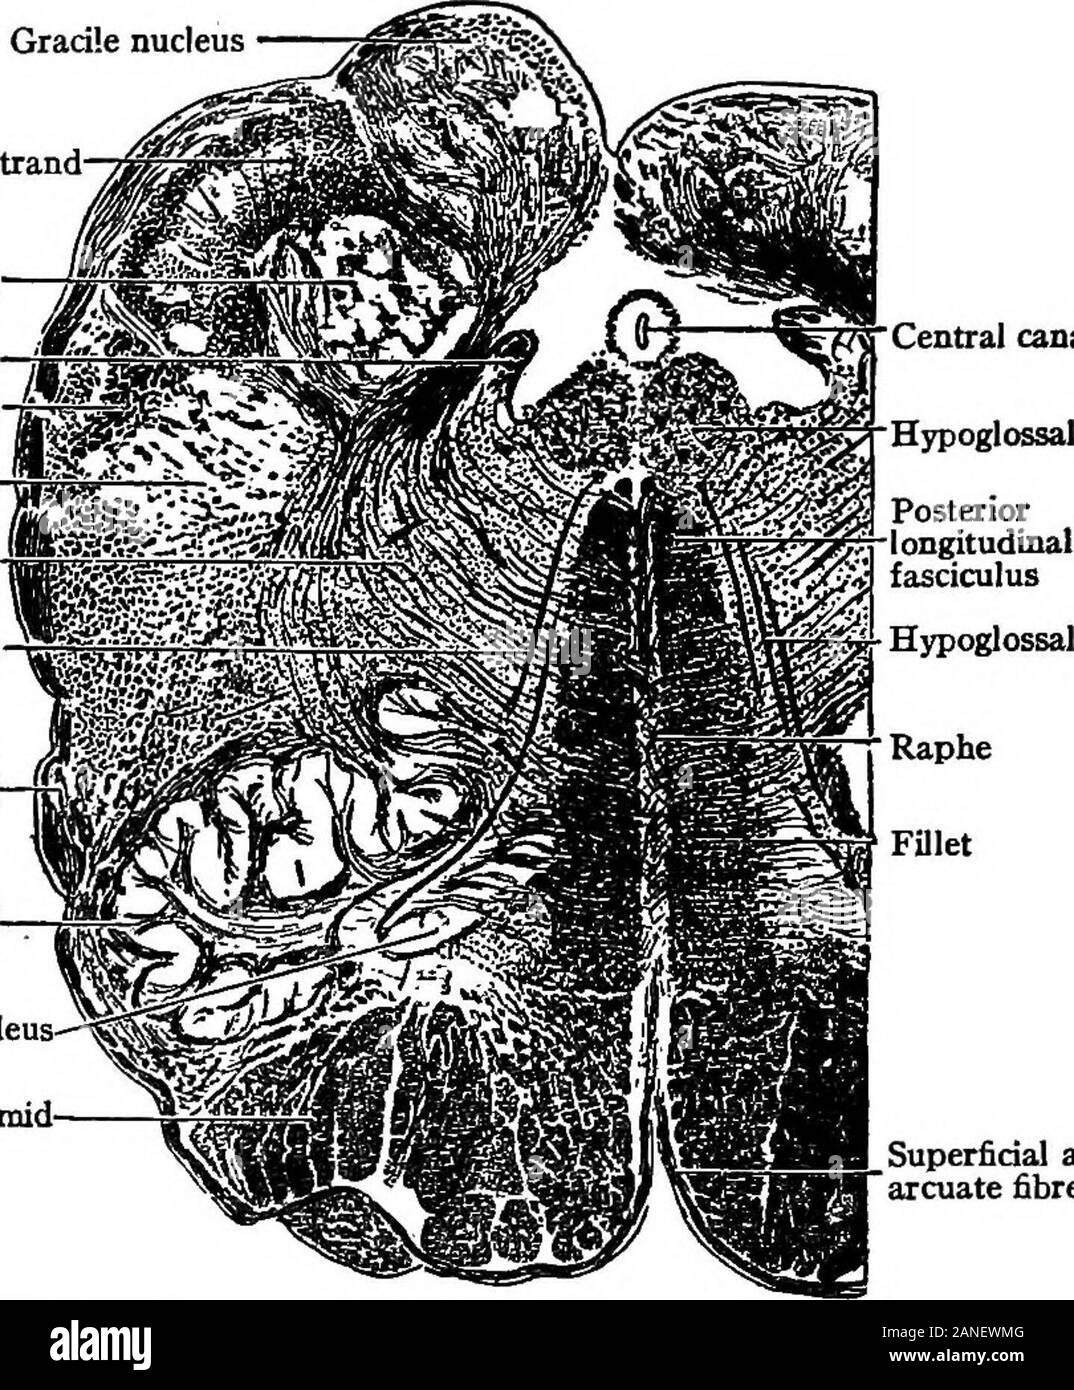 The encyclopdia britannica; a dictionary of arts, sciences, literature and general information . ae. All thesethree bundles appear to be continued up into thecerebellum as the restiform bodies or inferior cere-bellar peduncles, but really the continuity is veryslight, as the restiform bodies are formedfrom thedirect cerebellar tracts of the spinal cord joining withthe superficial arcuate fibres which curve back justbelow the olivary bodies. The upper part of the fourth   „ •i,„v,t!.&lt;^, . , . i  J J i  ^L ? u 11 From Cuniunaaam. Text-book Of Anaiomy. ventricle is bounded by the superior cere Stock Photo